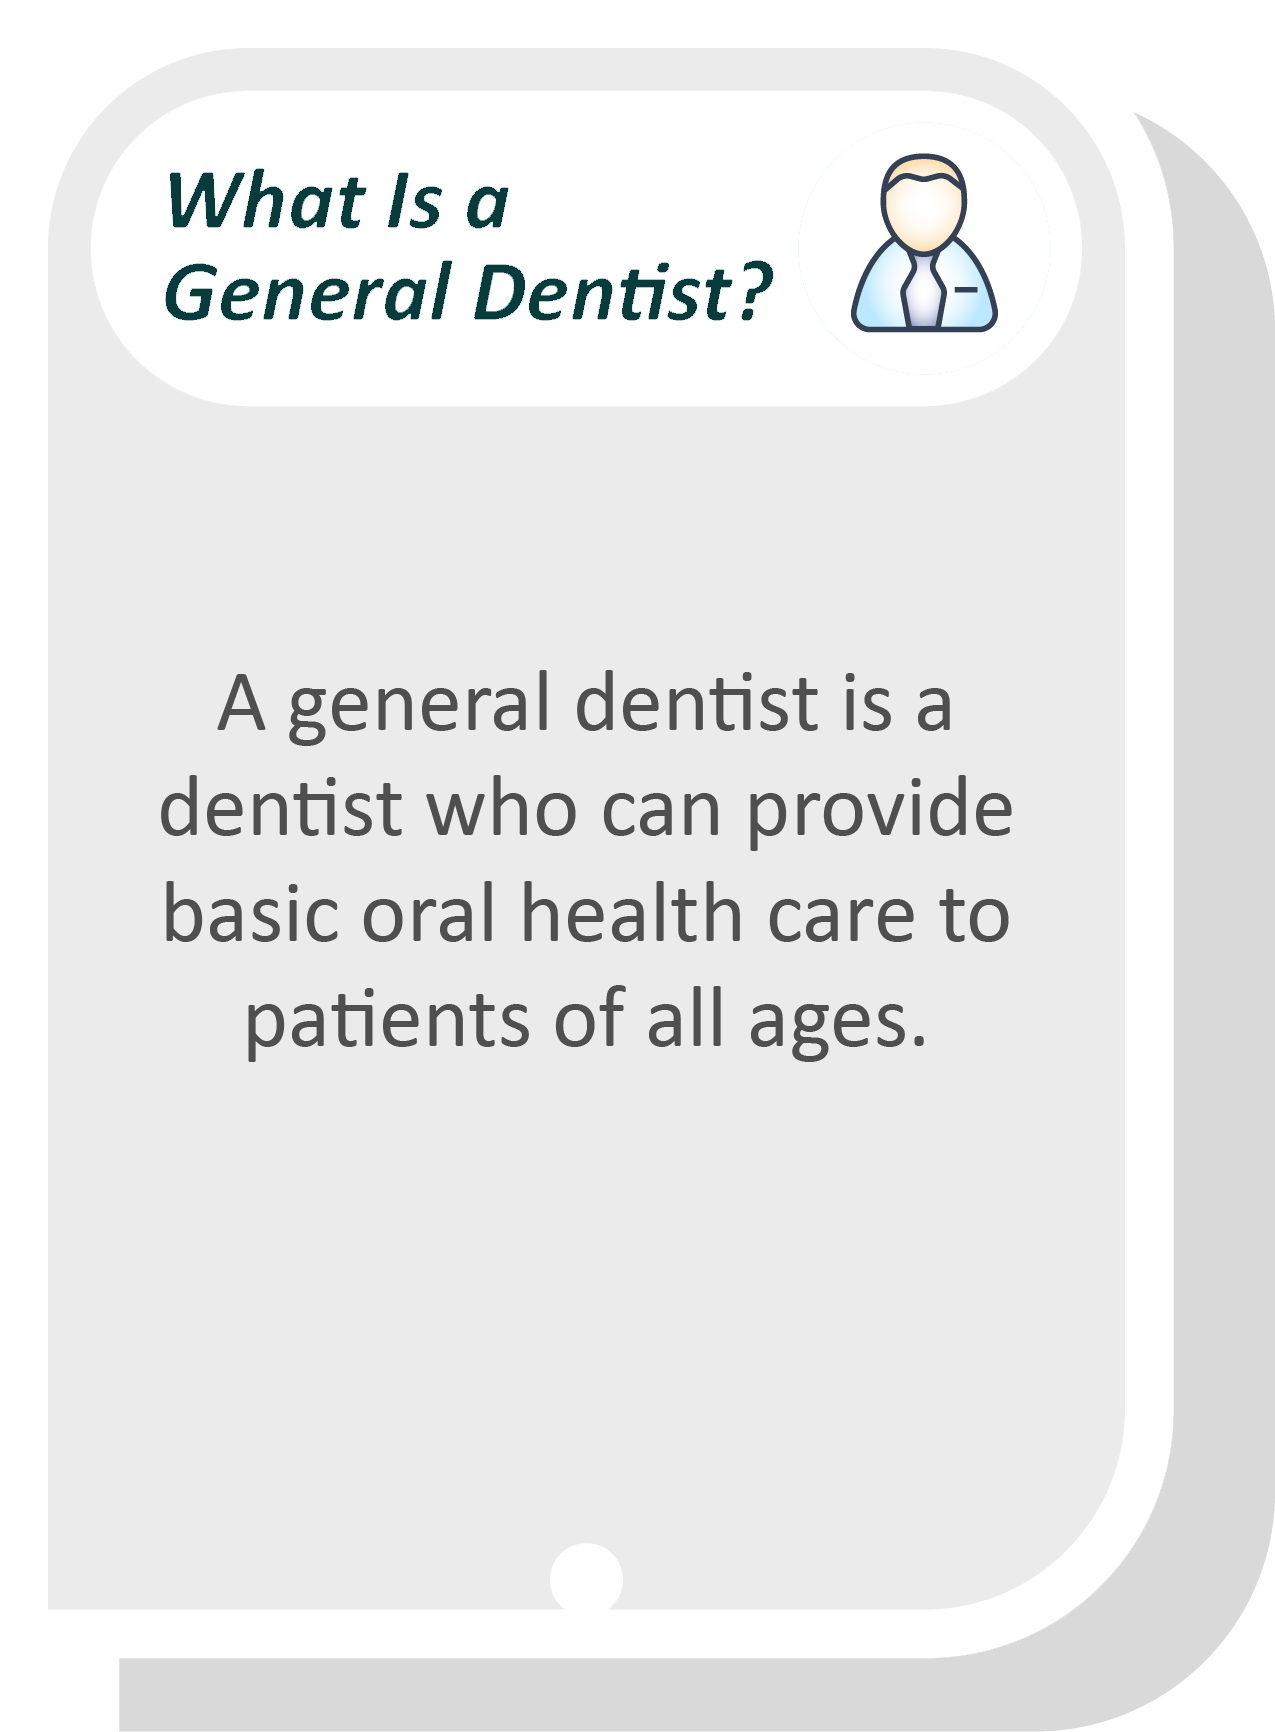 General dentist infographic: A general dentist is a dentist who can provide basic oral health care to patients of all ages.